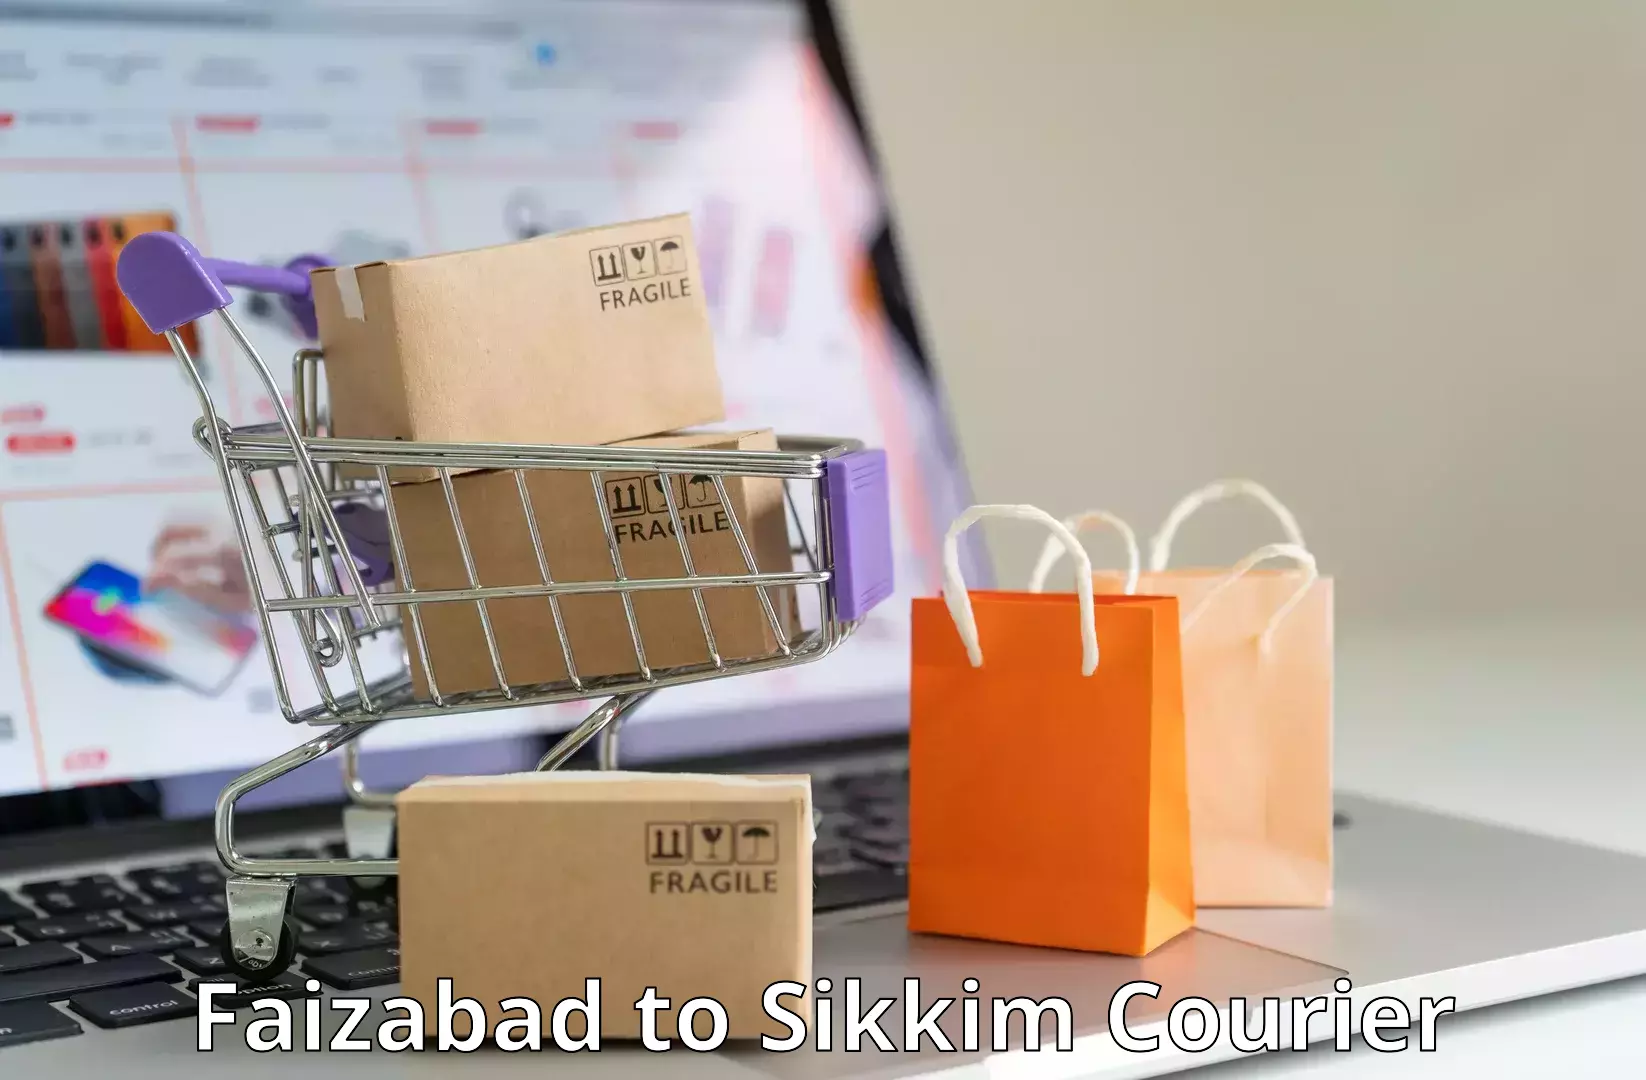 Automated parcel services Faizabad to Pelling